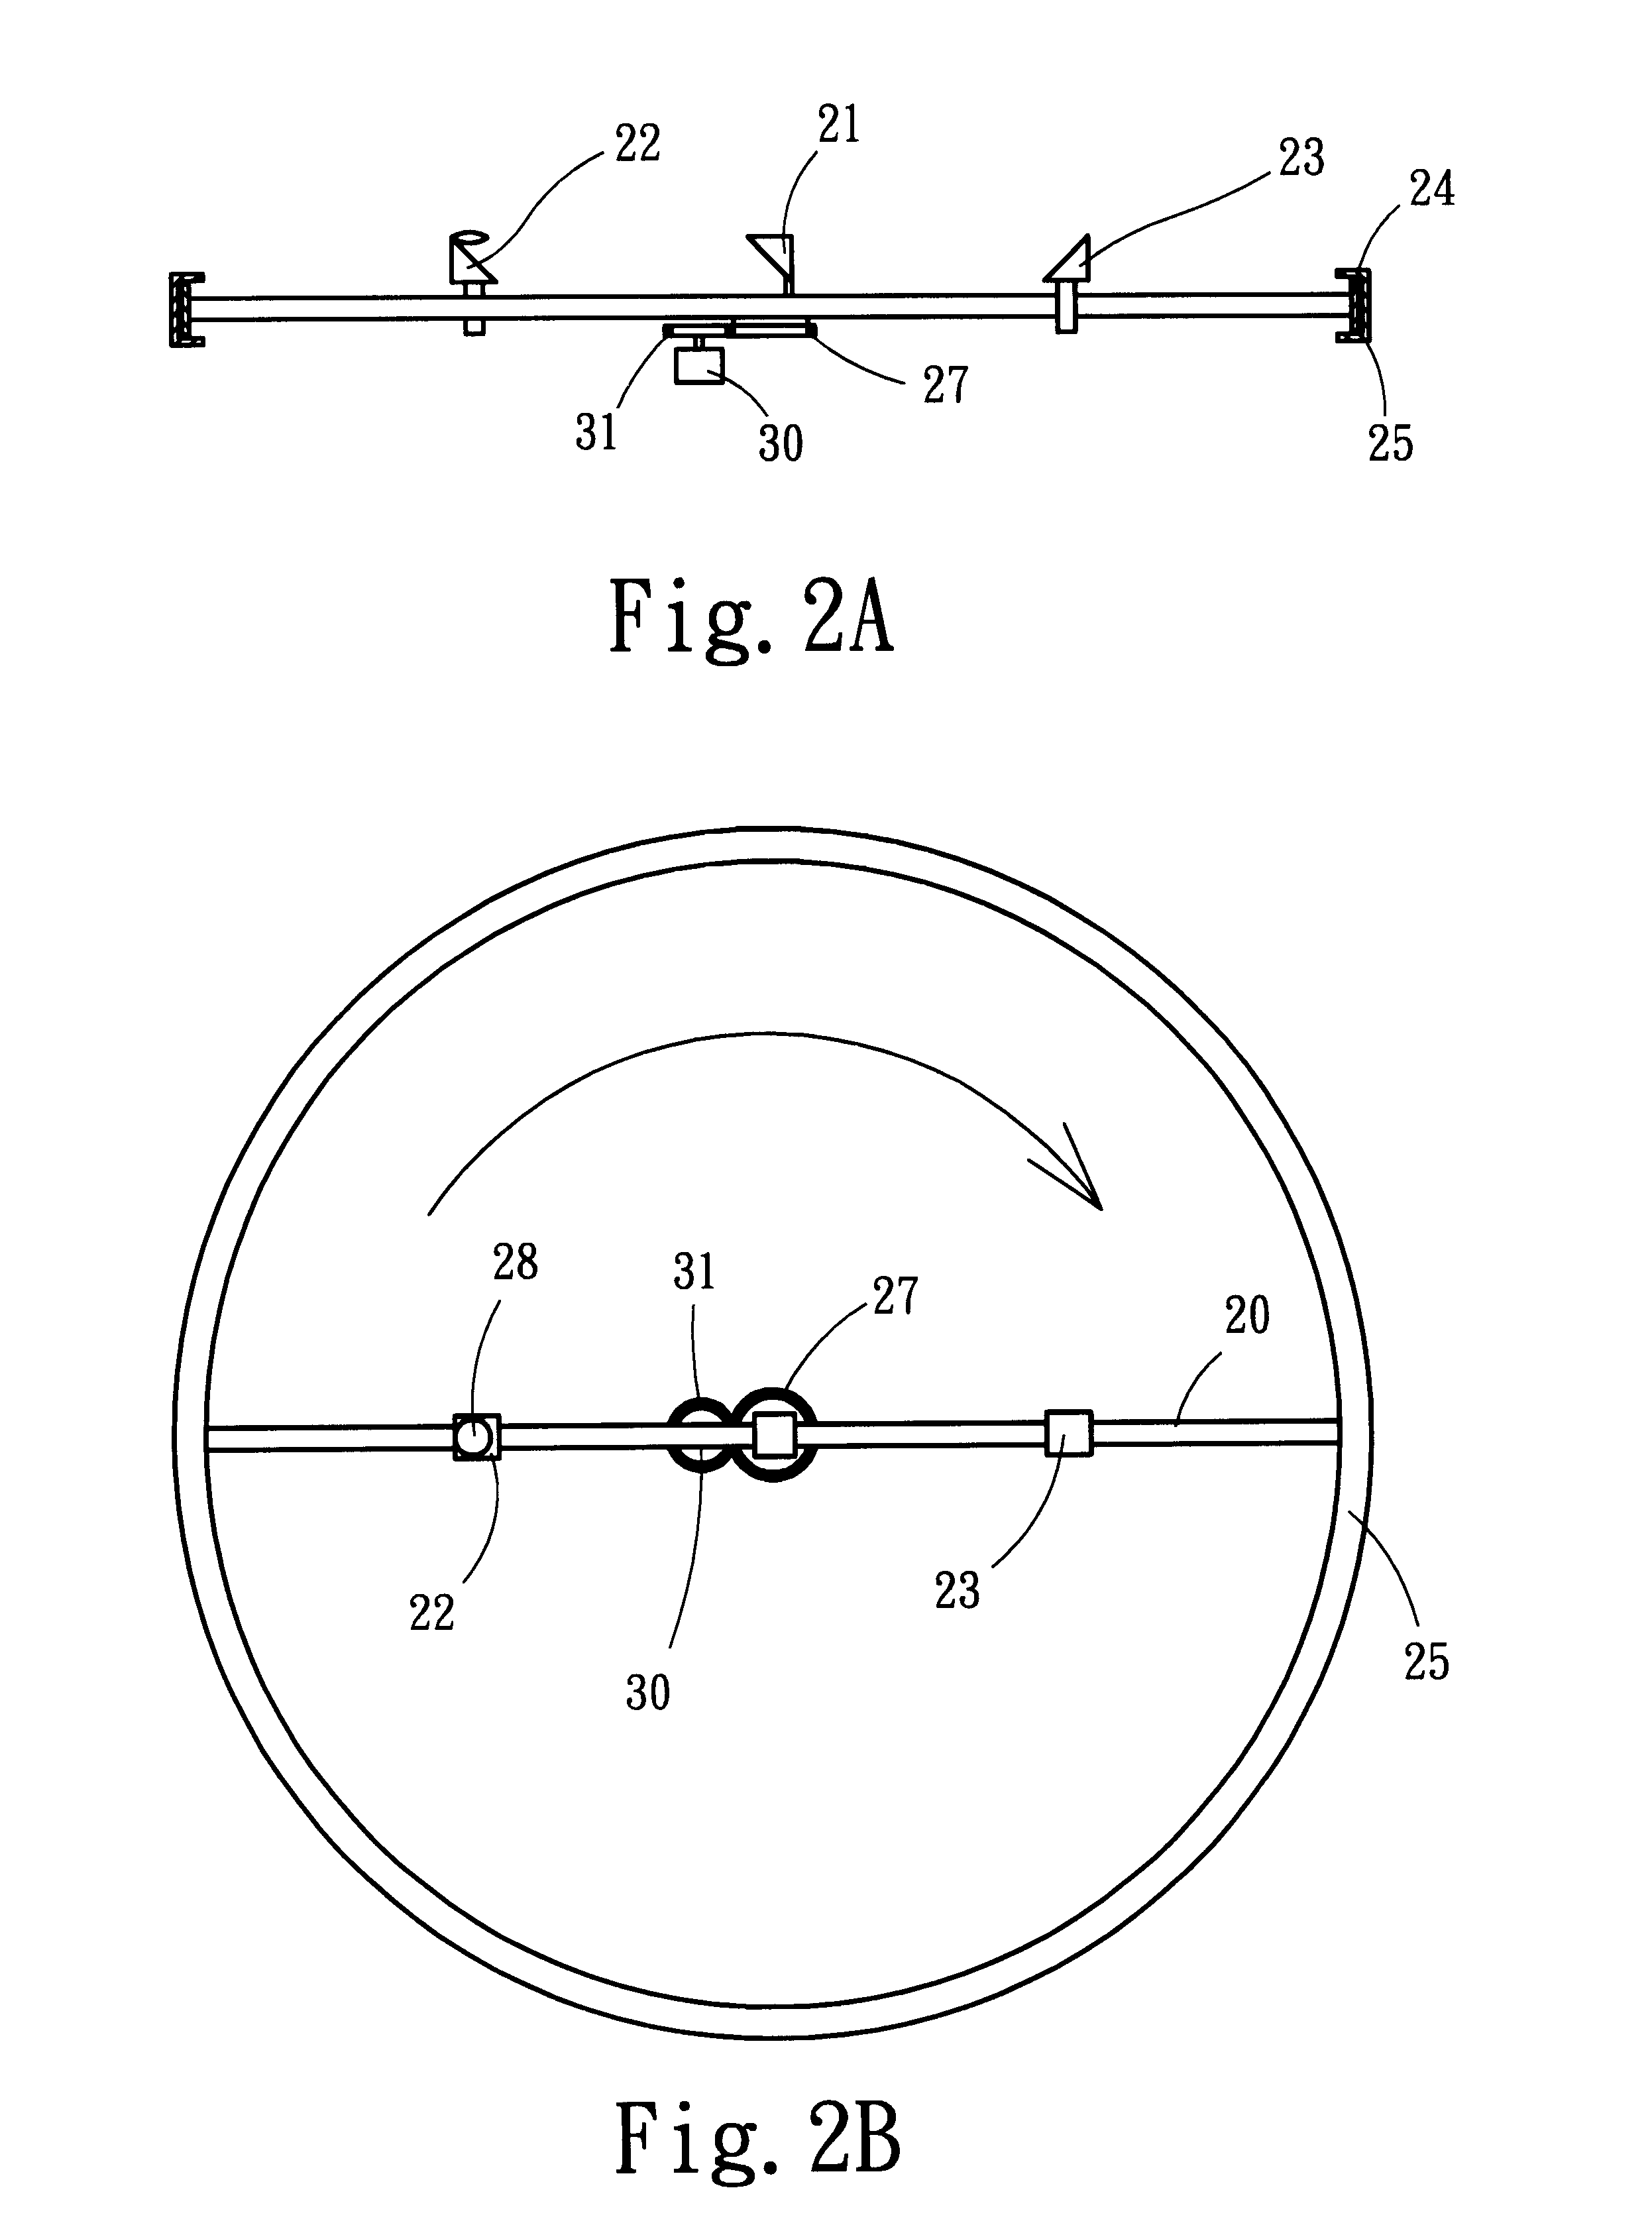 Lower inertial compact disc drive